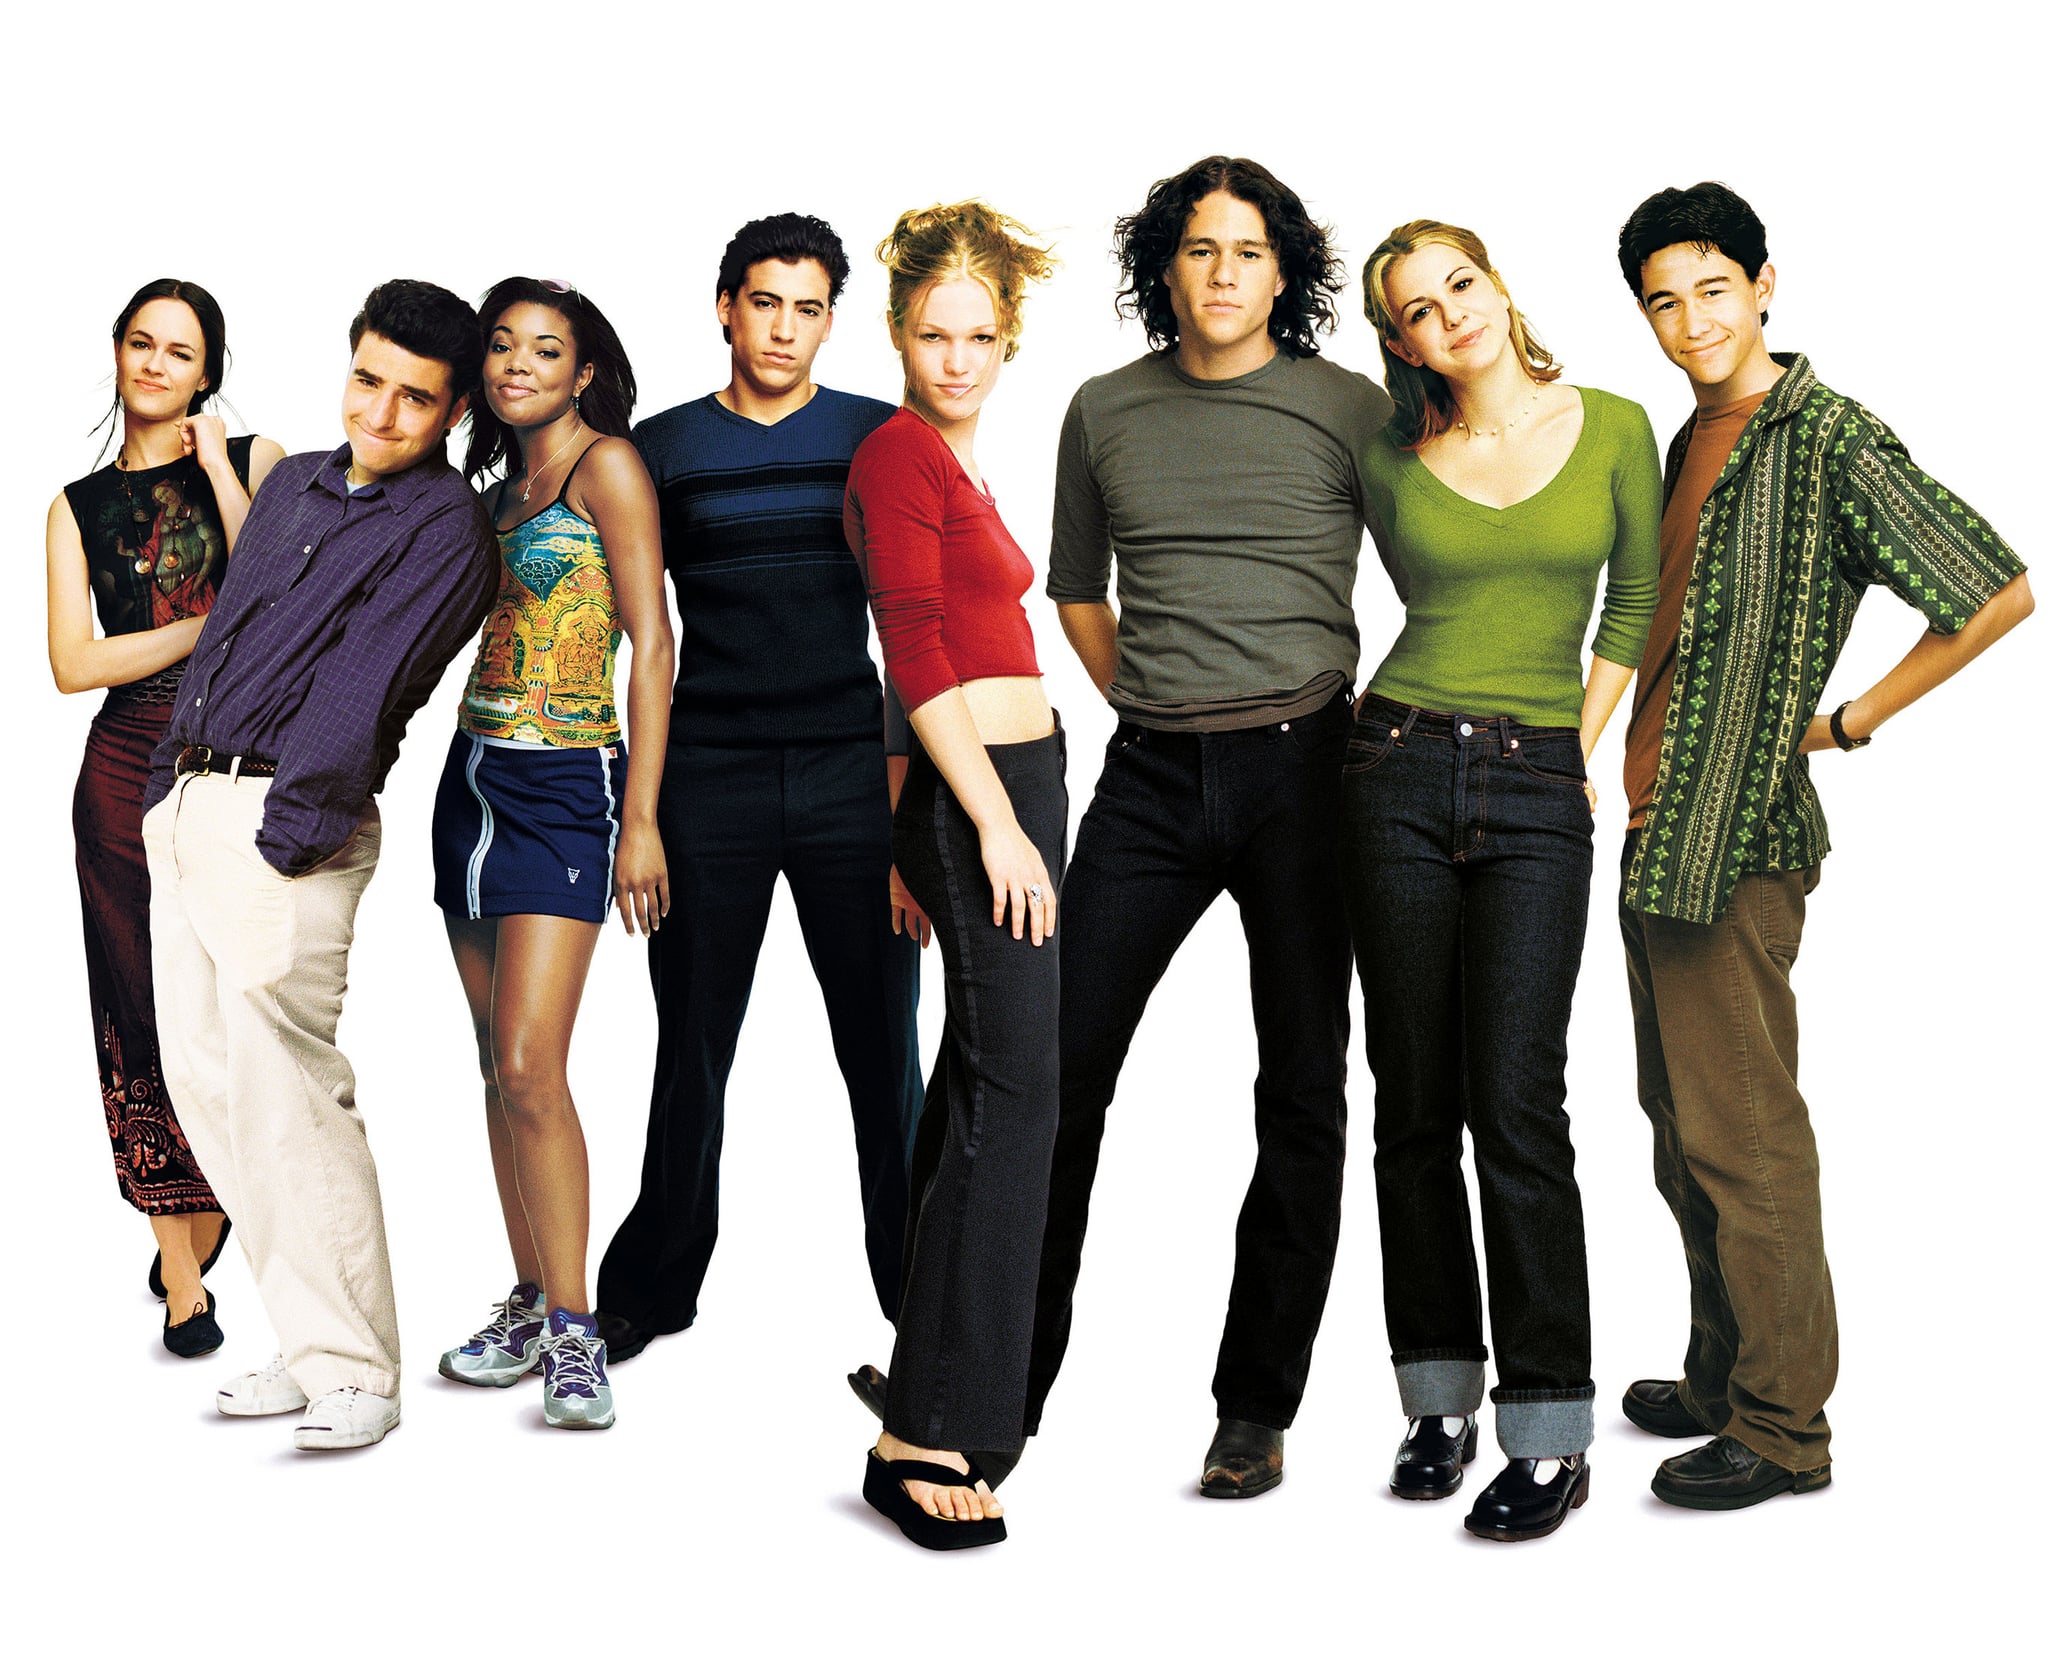 Joseph Gordon-Levitt Remembers 10 Things I Hate About You, 20 Years Later.